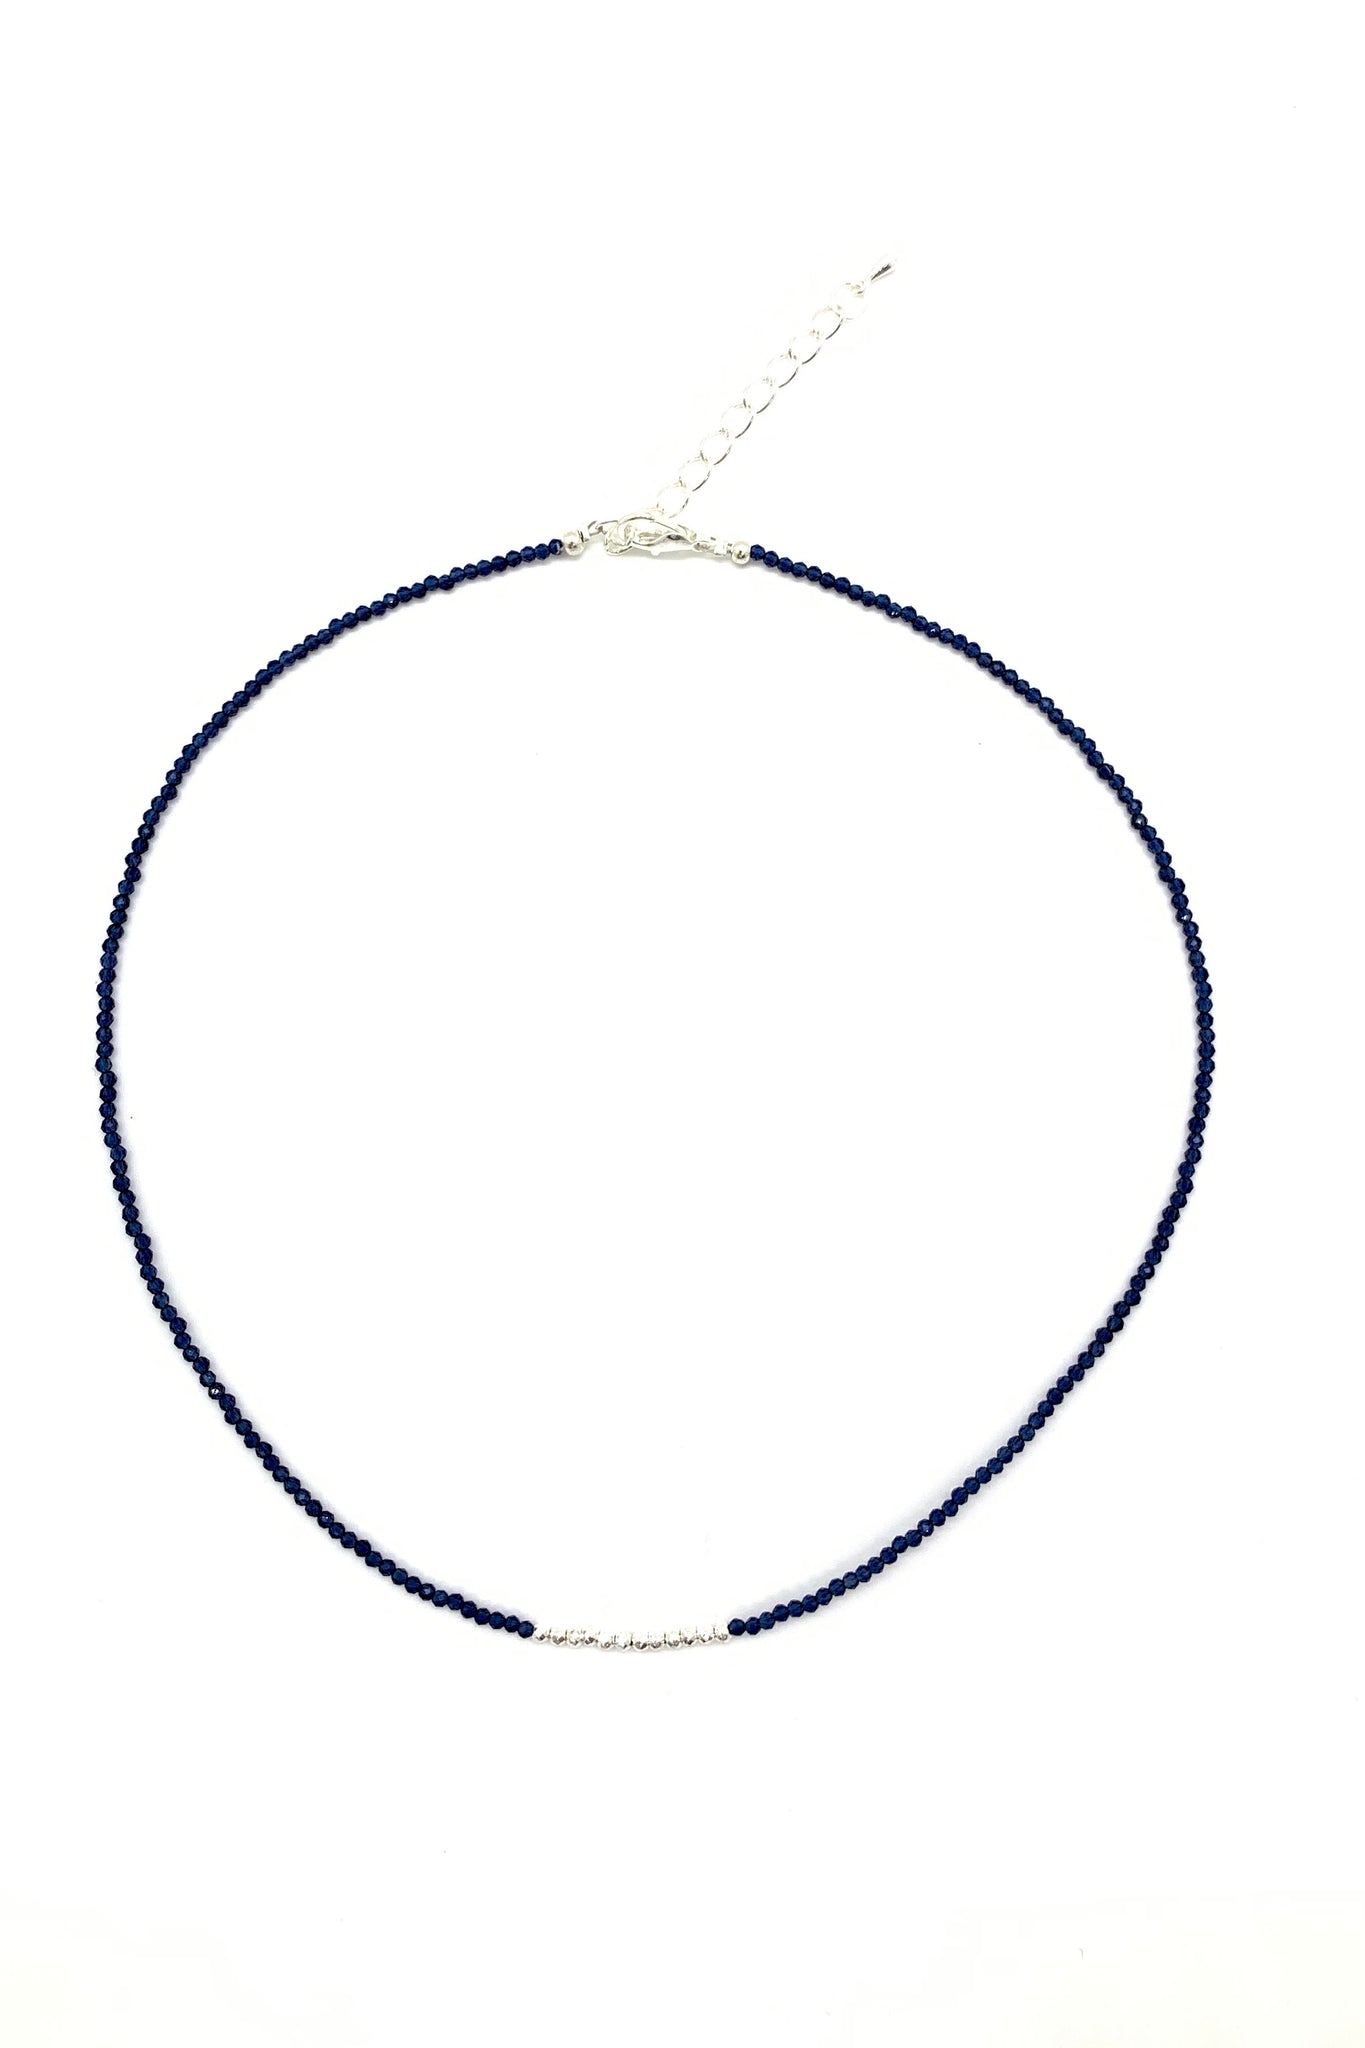 Short necklace in Navy Blue